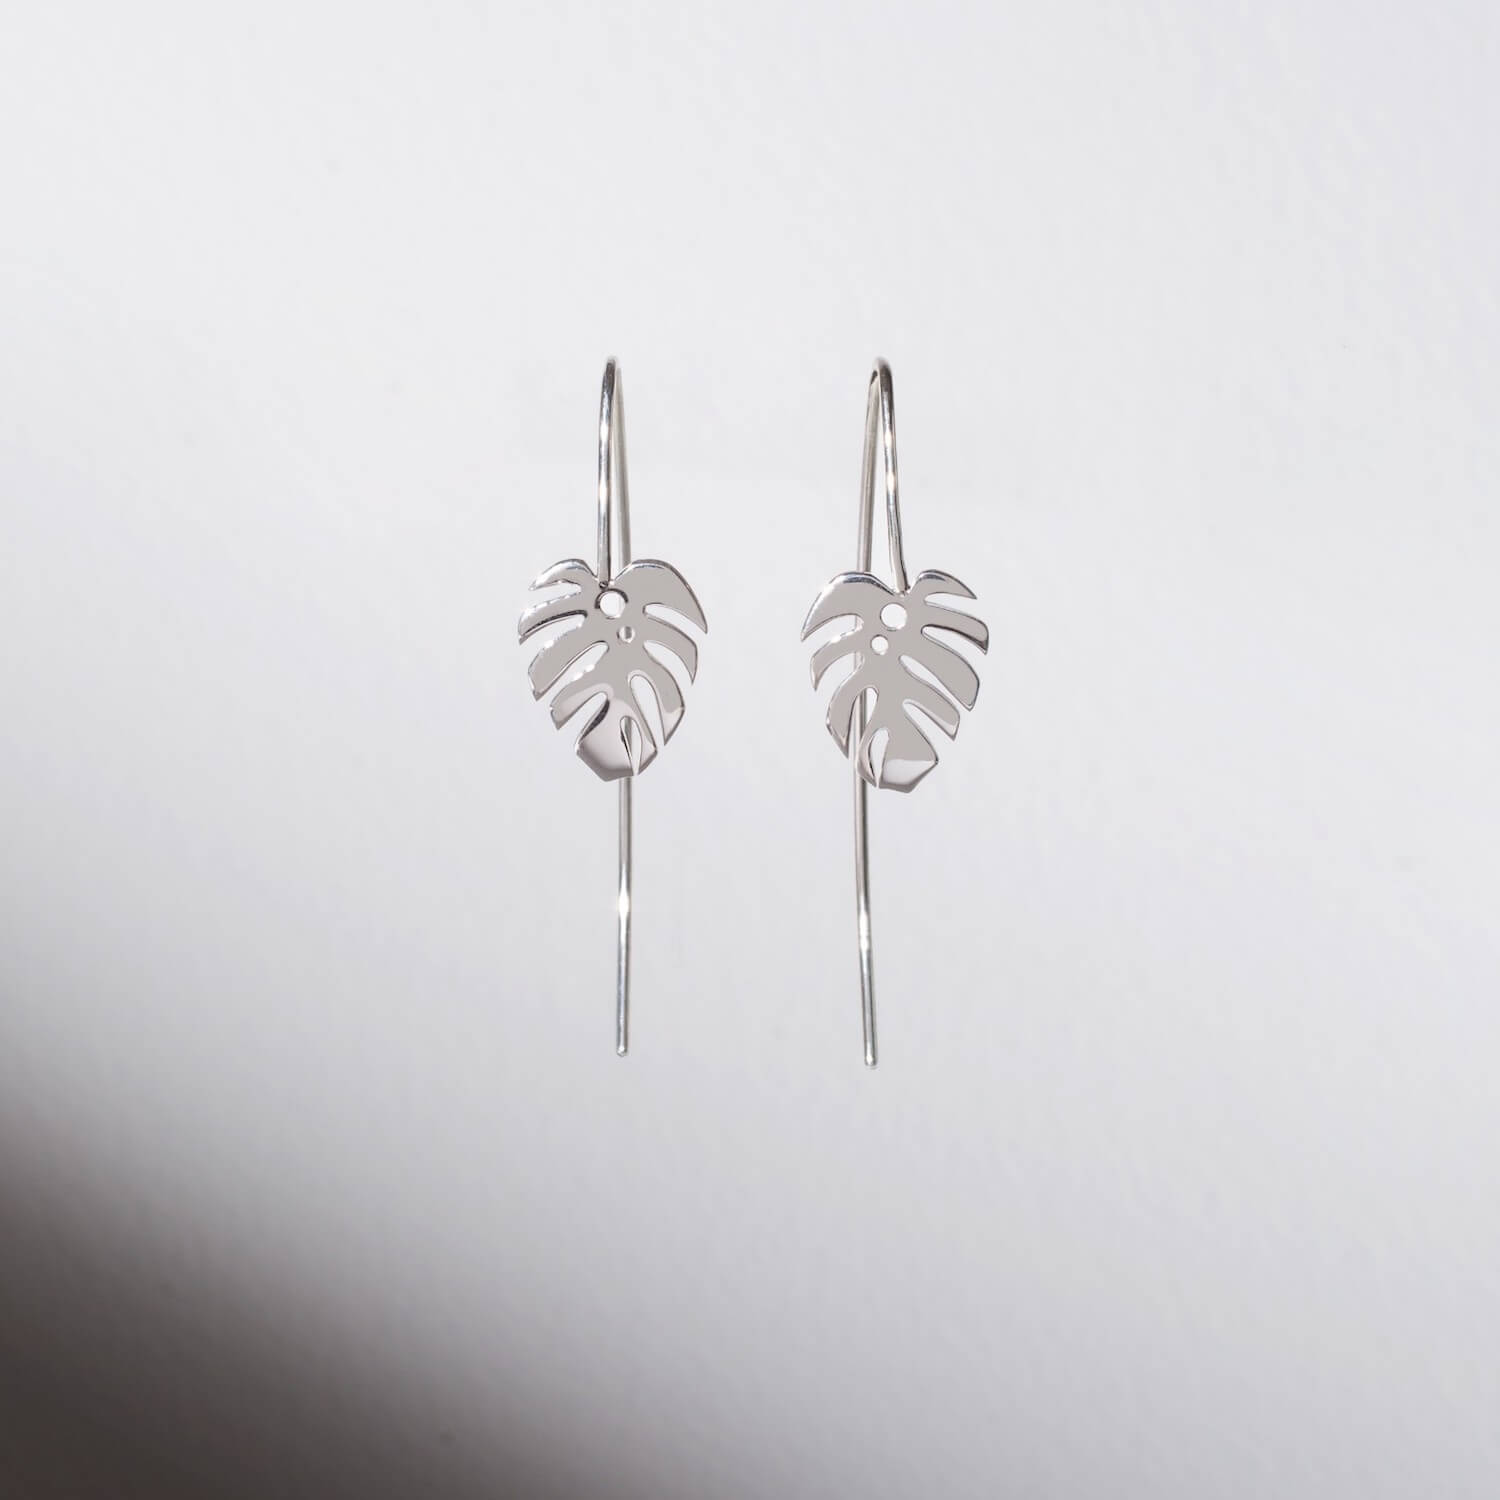 A pair of silver dropback earrings with cheeseplant charms